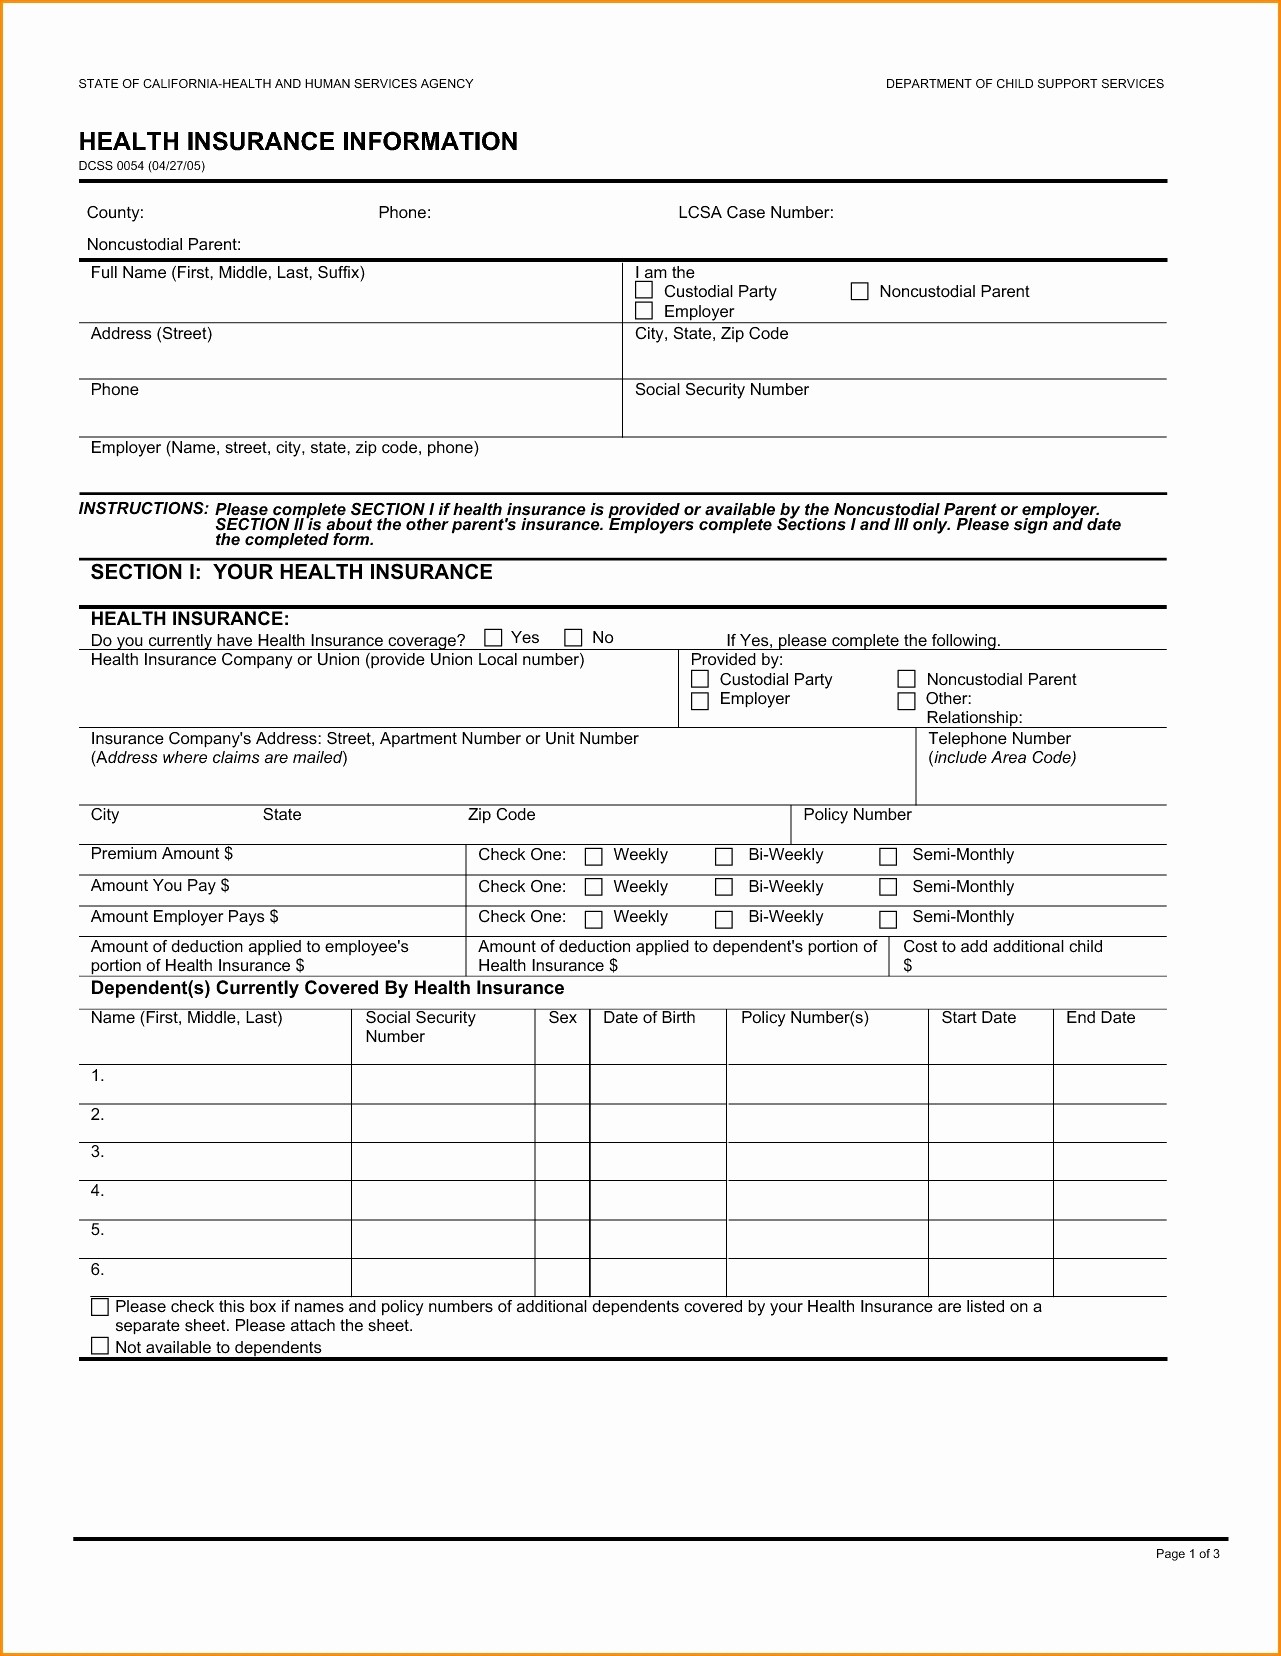 50 New State Farm Insurance Template DOCUMENTS IDEAS Document